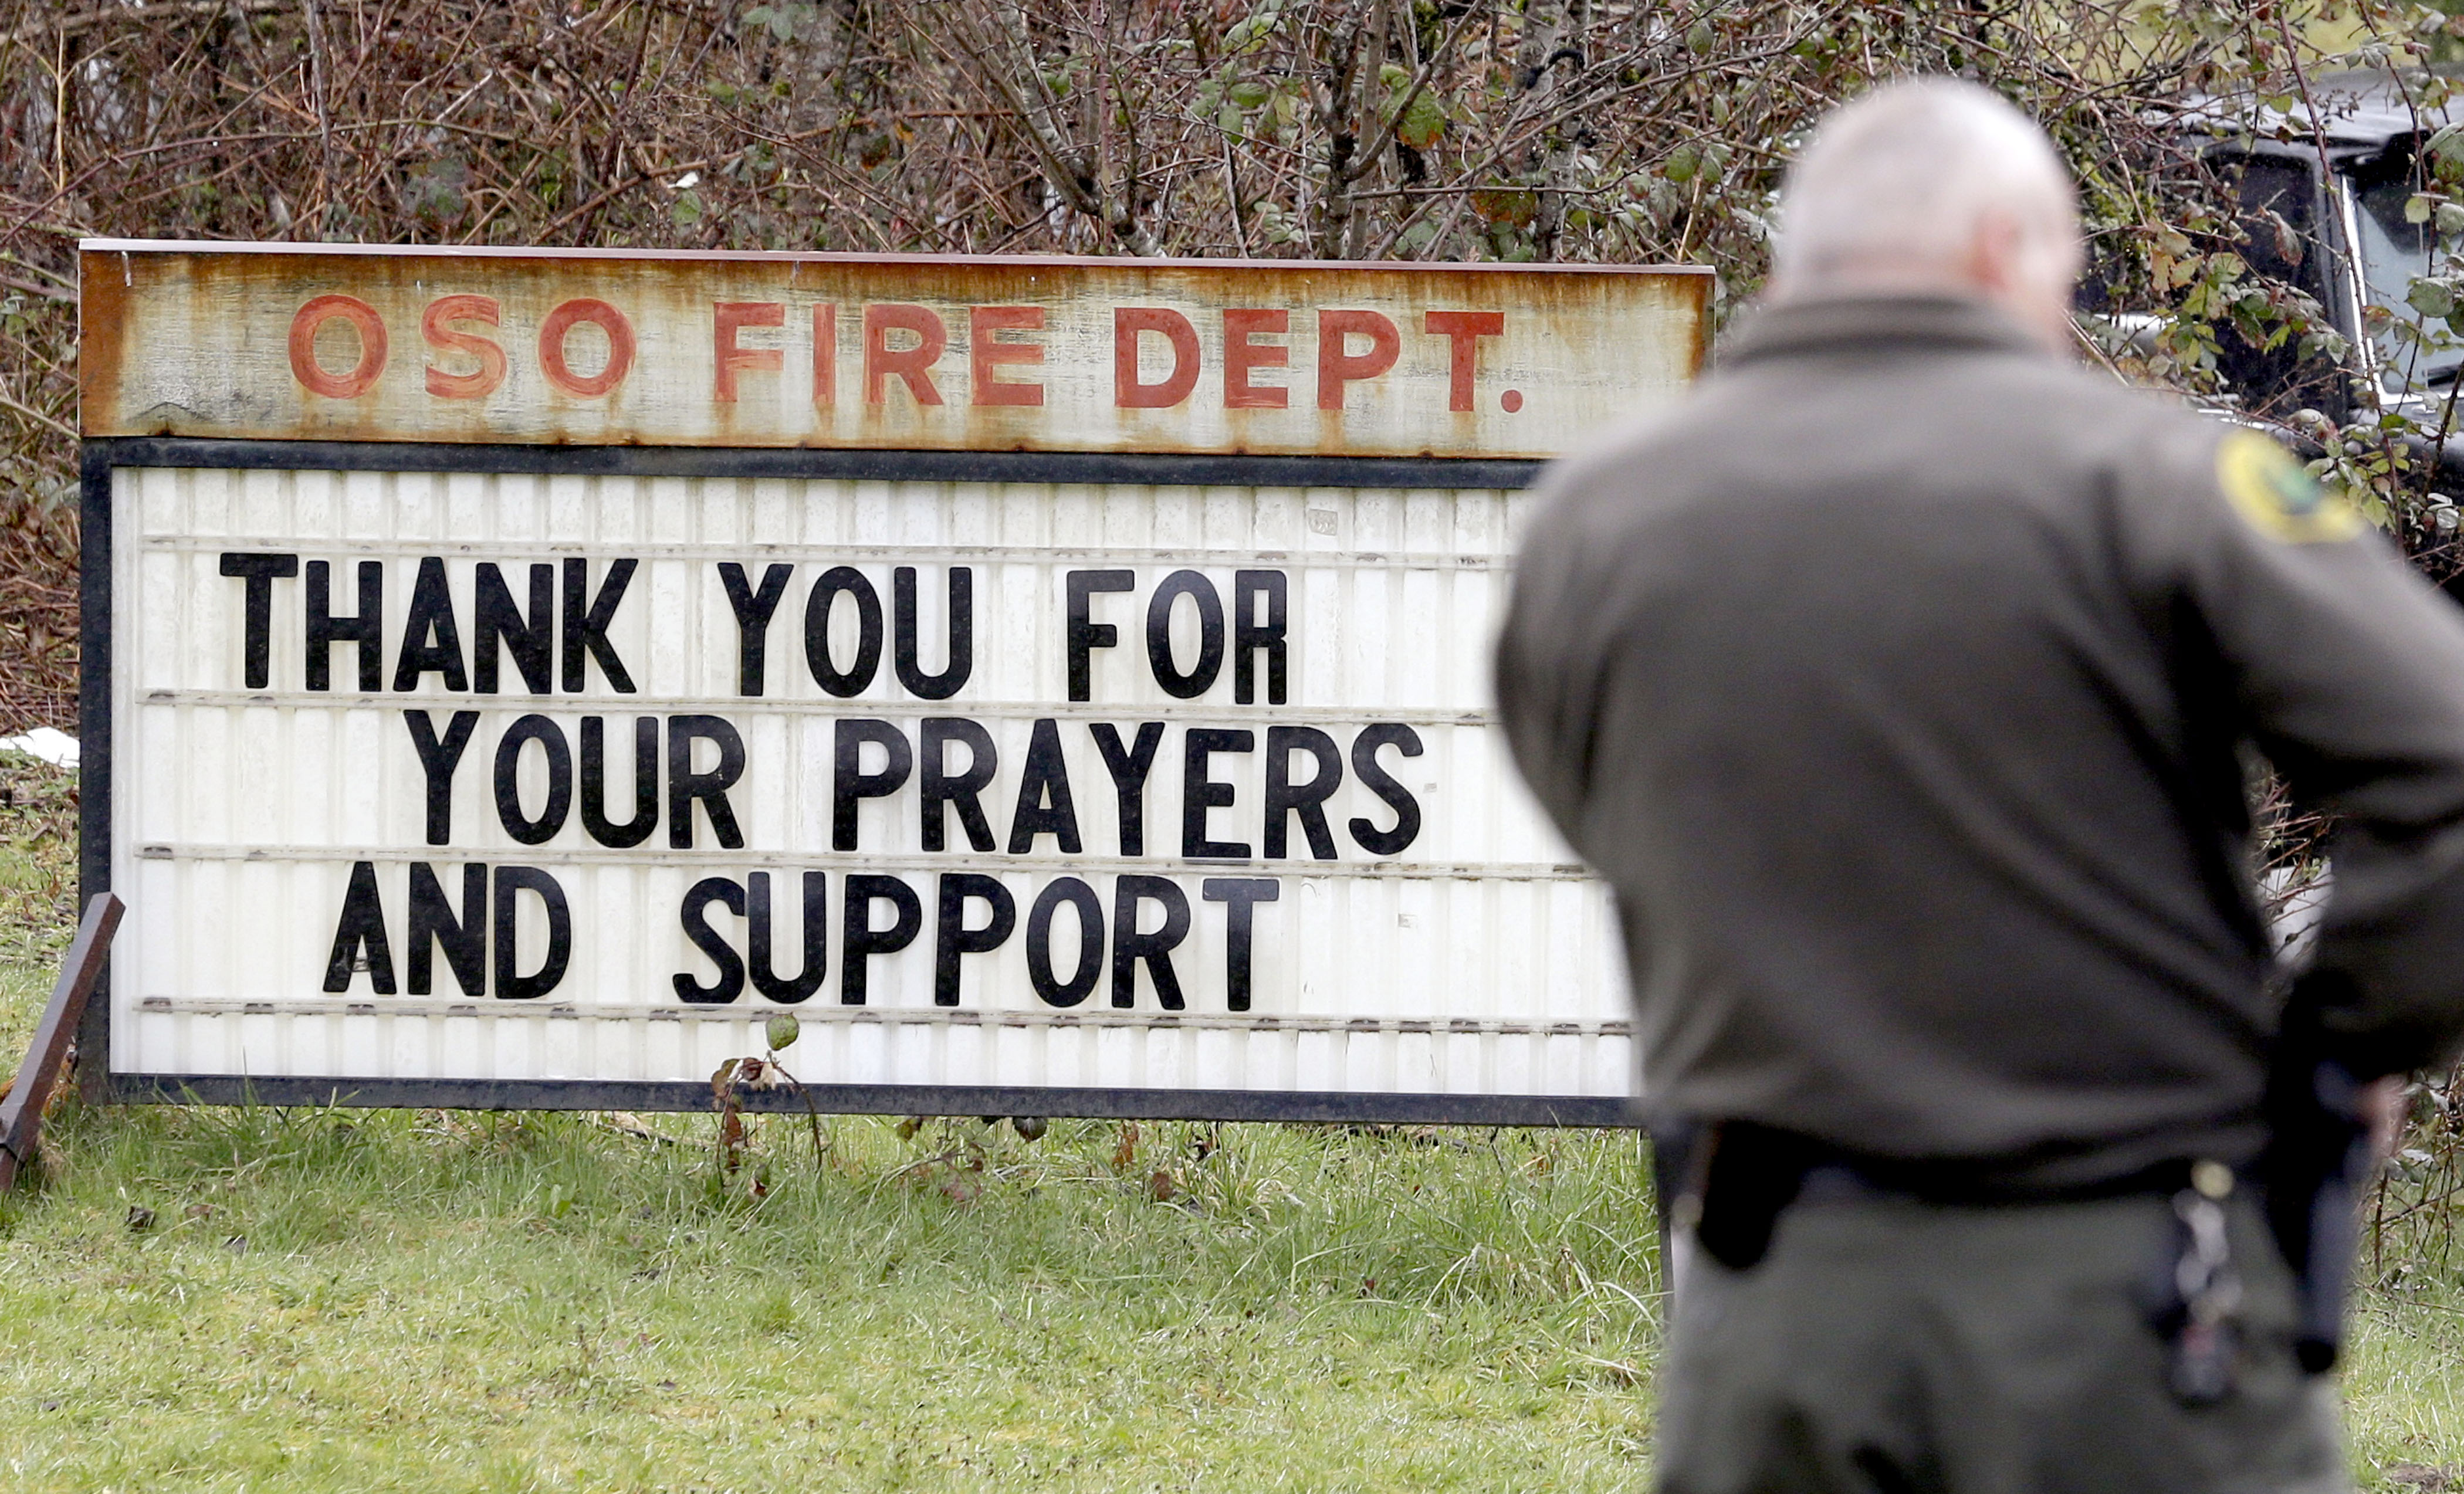 A sign outside the fire station in Oso on Thursday thanks people for support in the wake of the deadly mudslide. The Associated Press